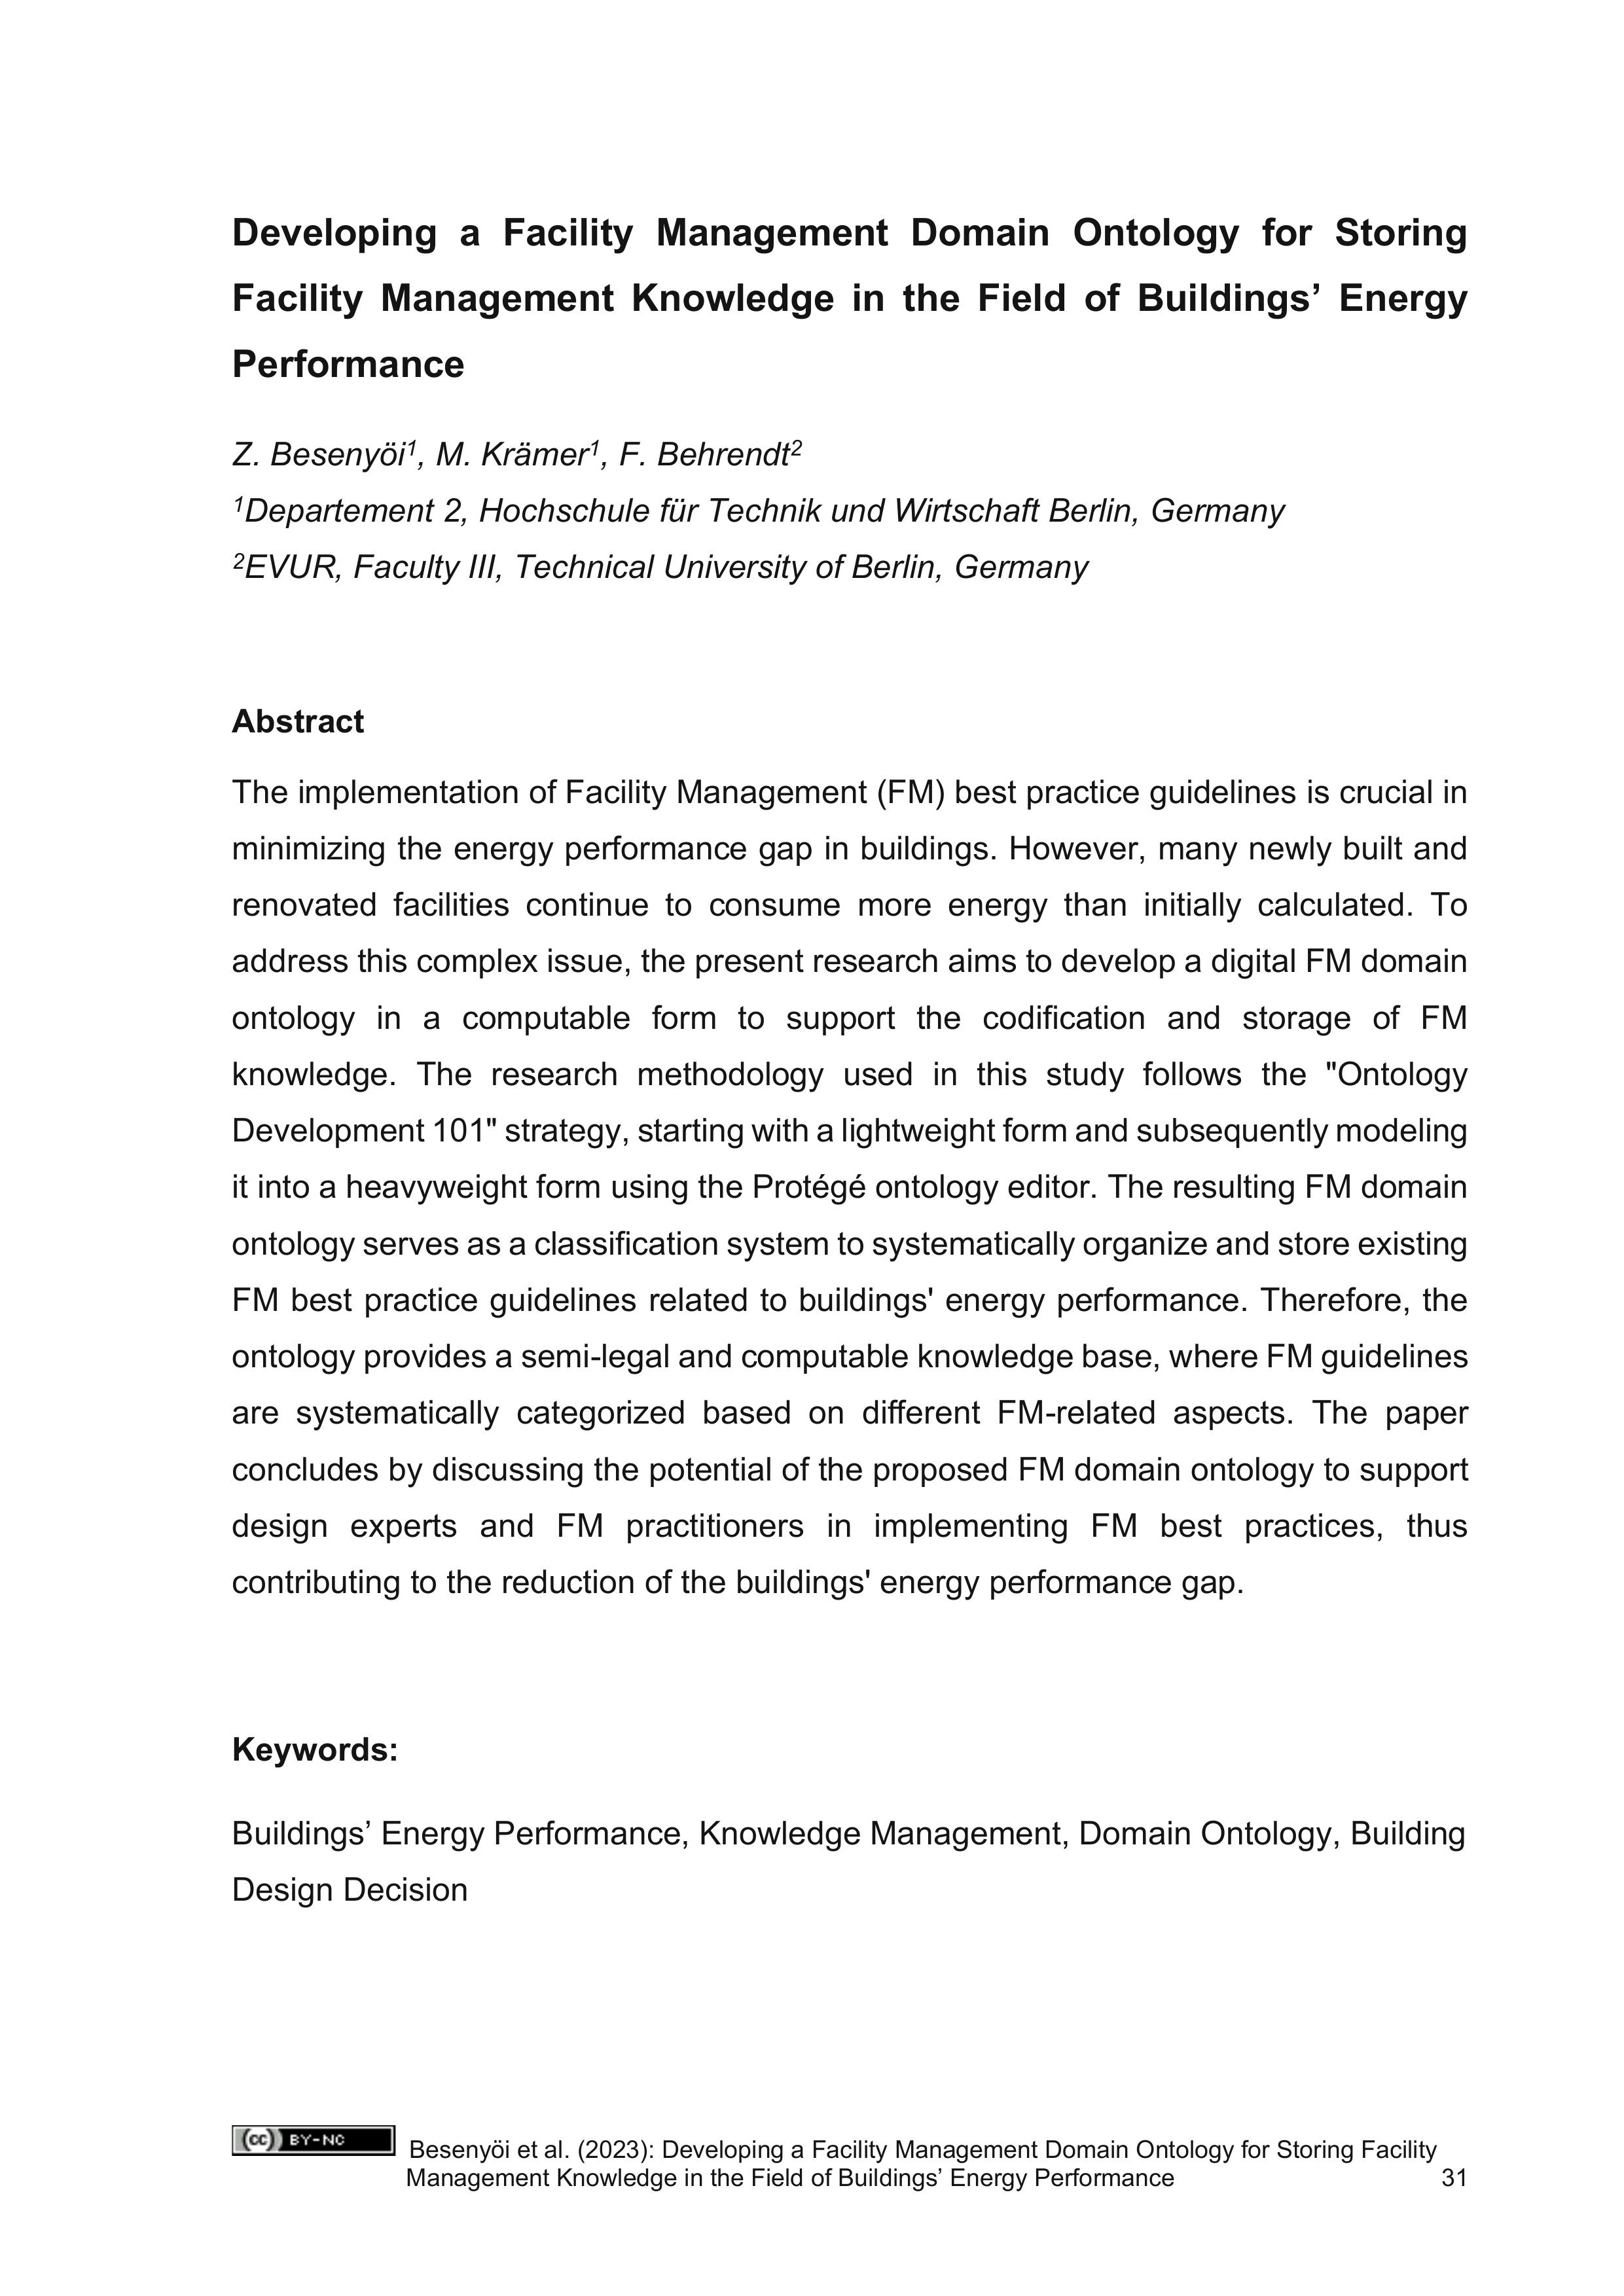 Developing a Facility Management Domain Ontology for Storing Facility Management Knowledge in the Field of Buildings’ Energy Performance